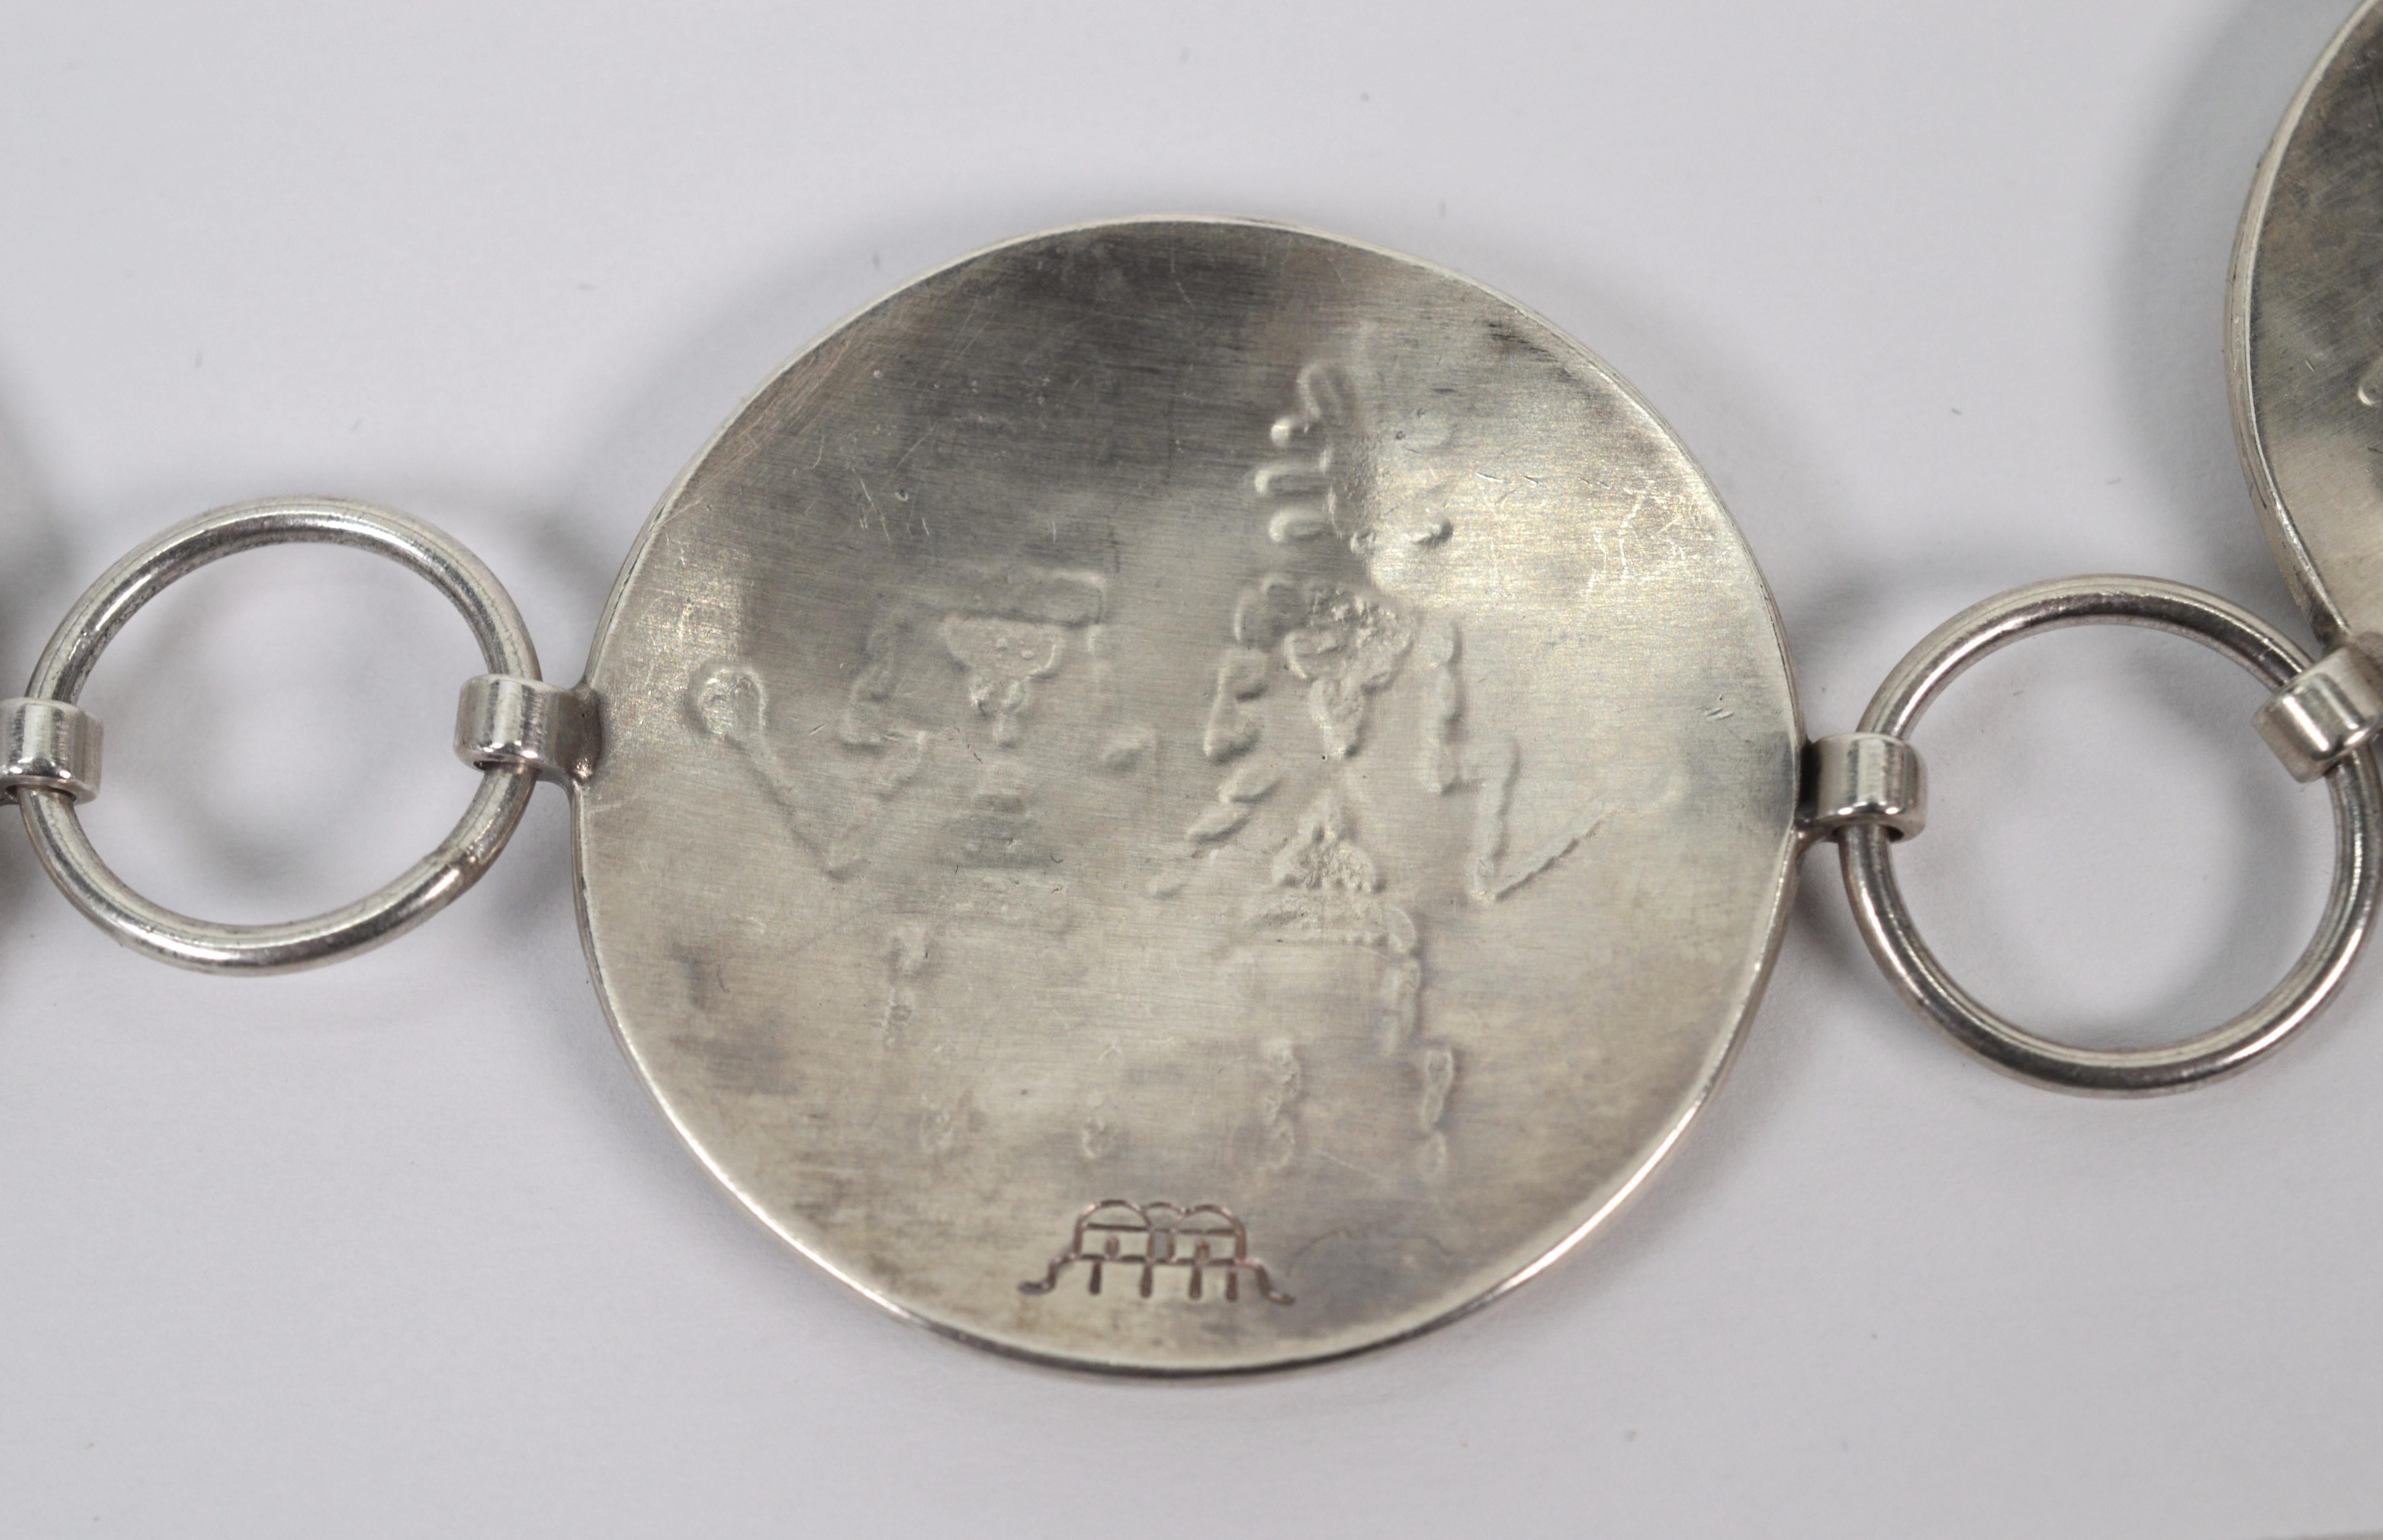 Artisan Hopi Silver Concho Belt In Good Condition For Sale In Mount Kisco, NY